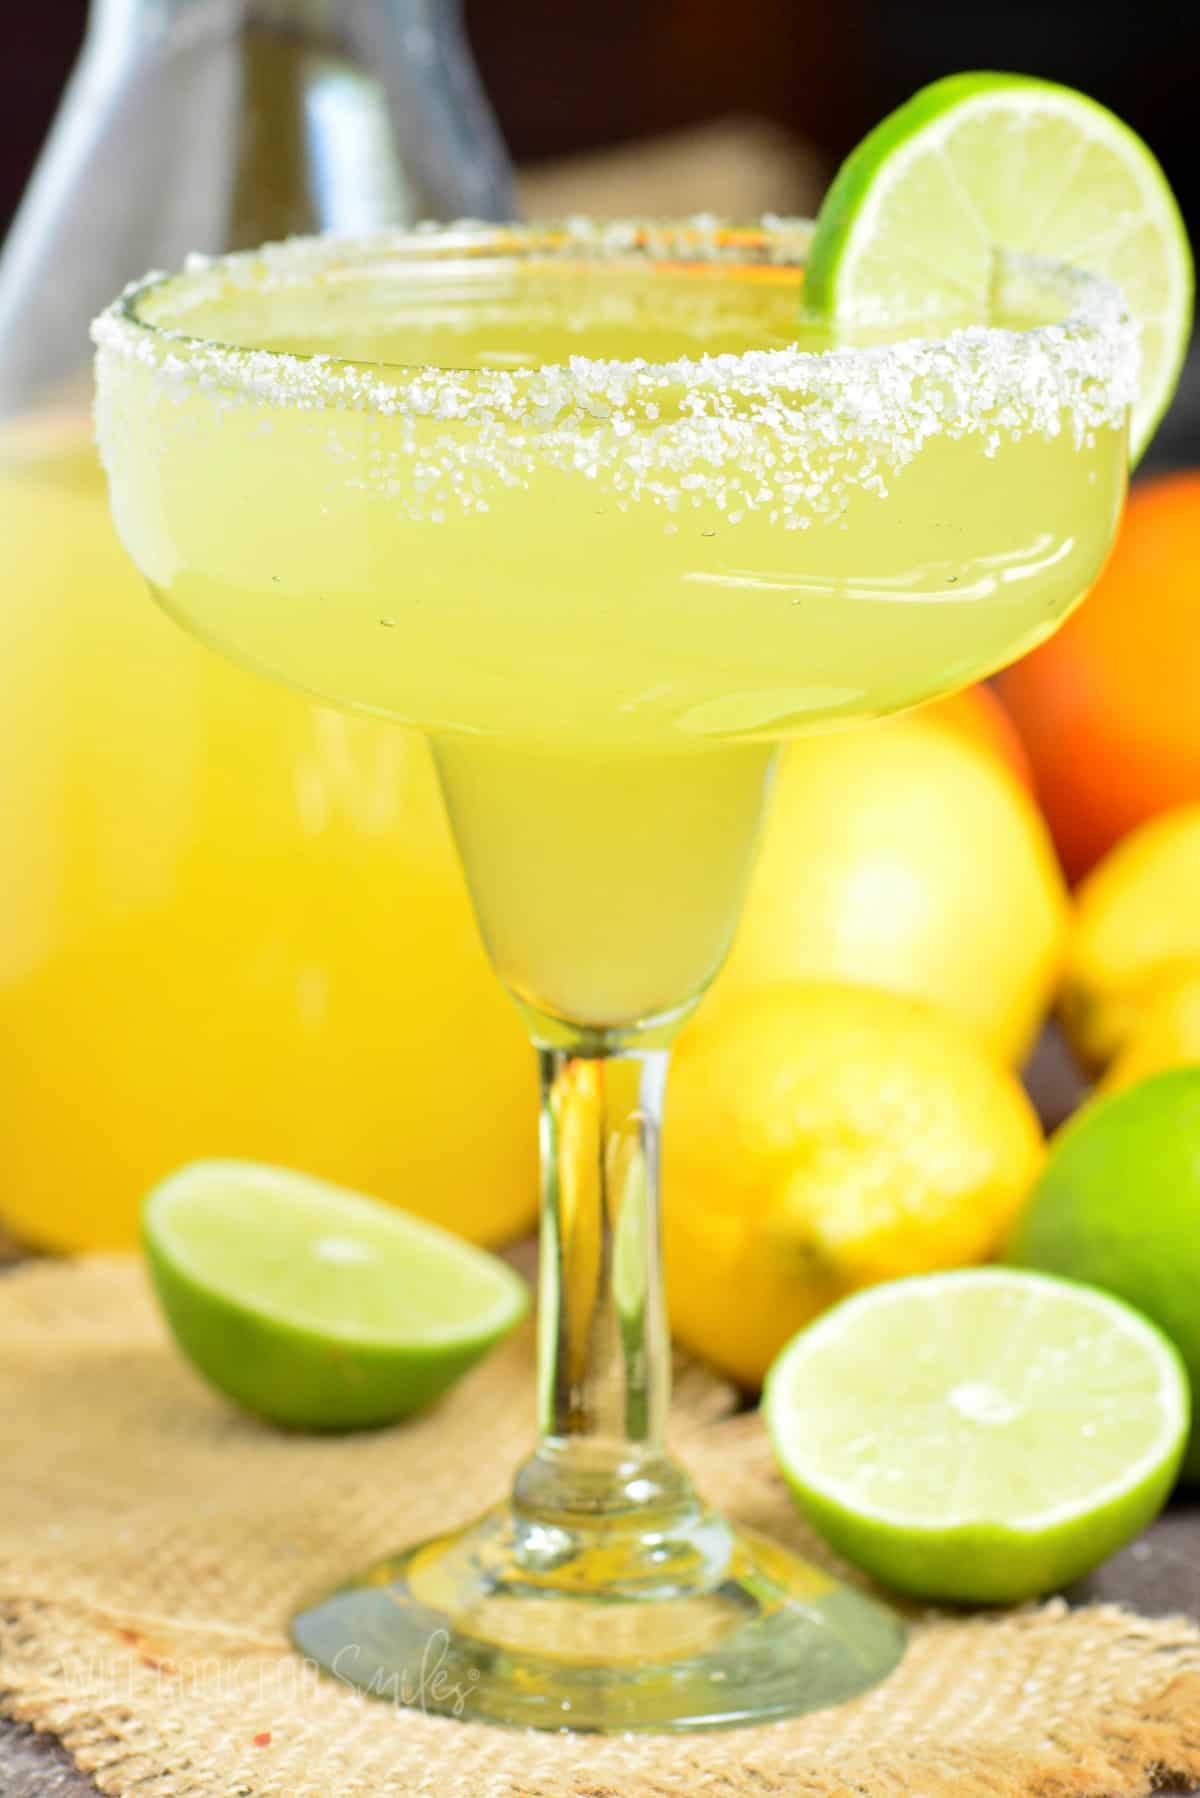 full view of a margarita glass filled with cocktail, salted rim, and lime on side.